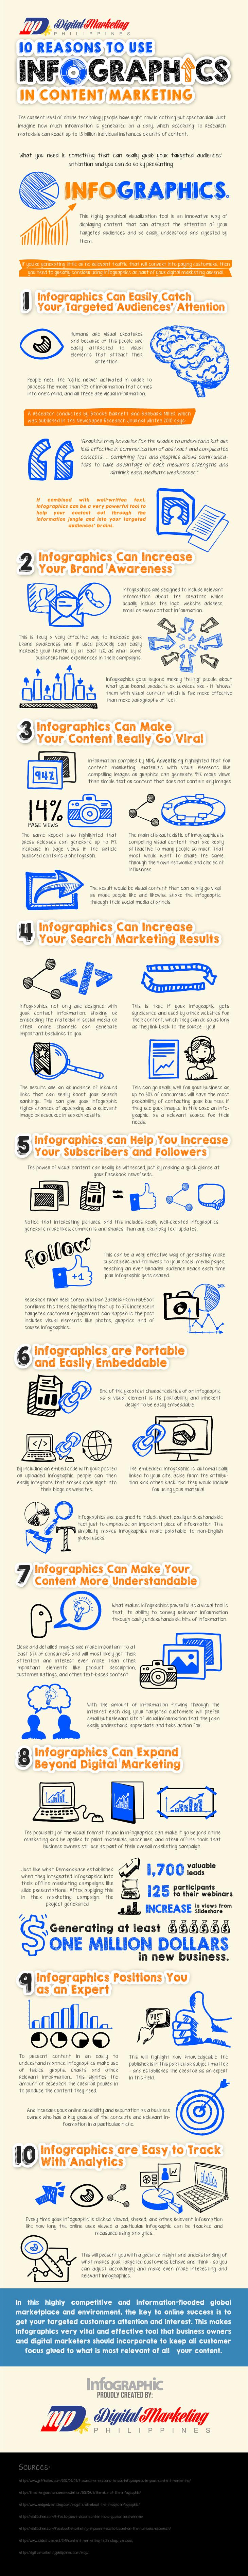 10-Reasons-to-Use-Infographics-in-Content-Marketing